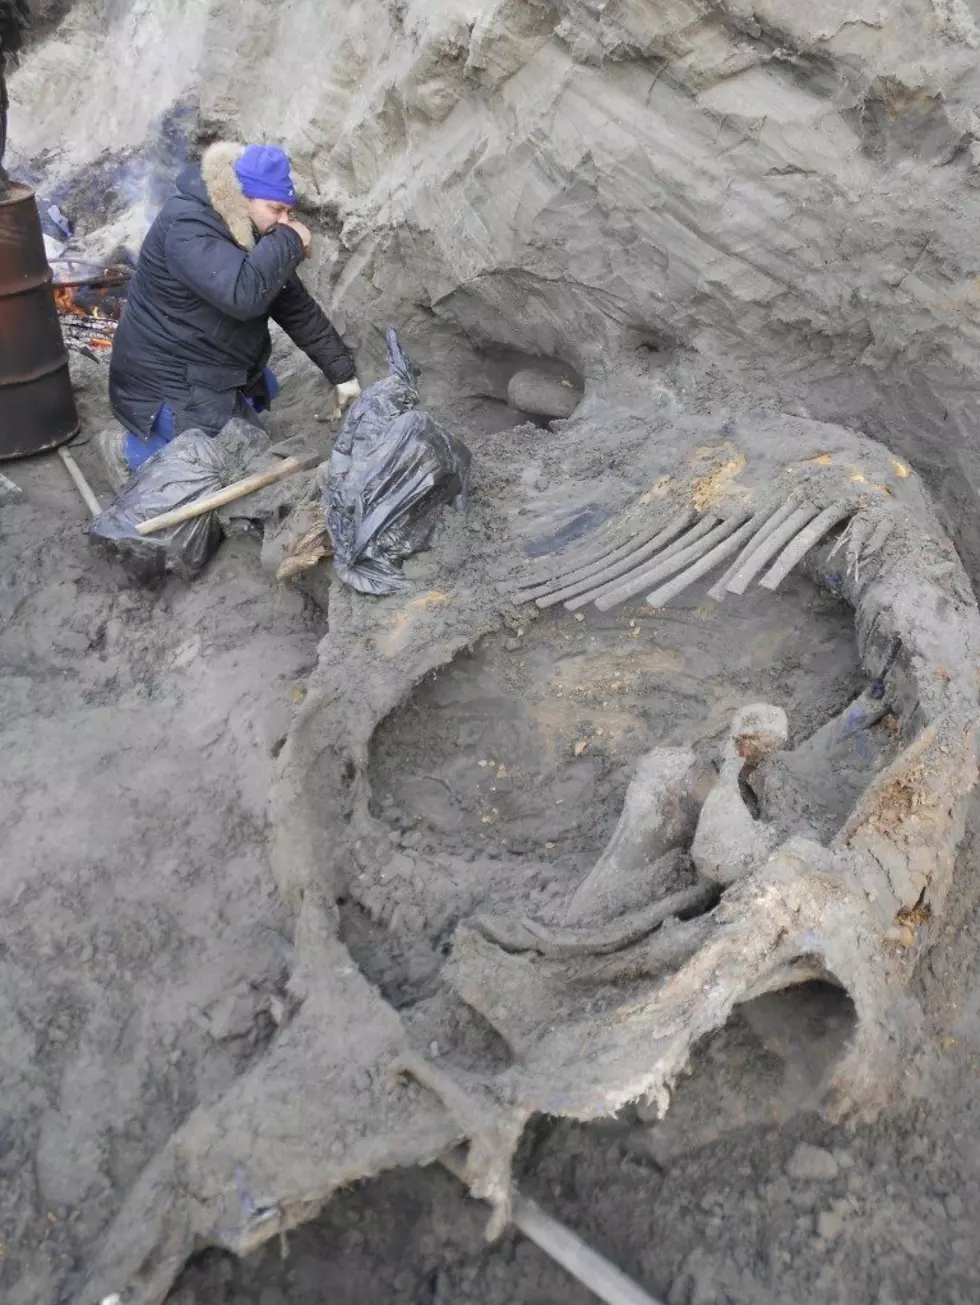 Mammoth Killed by Ancient Arctic Hunters 45,000 Years Ago